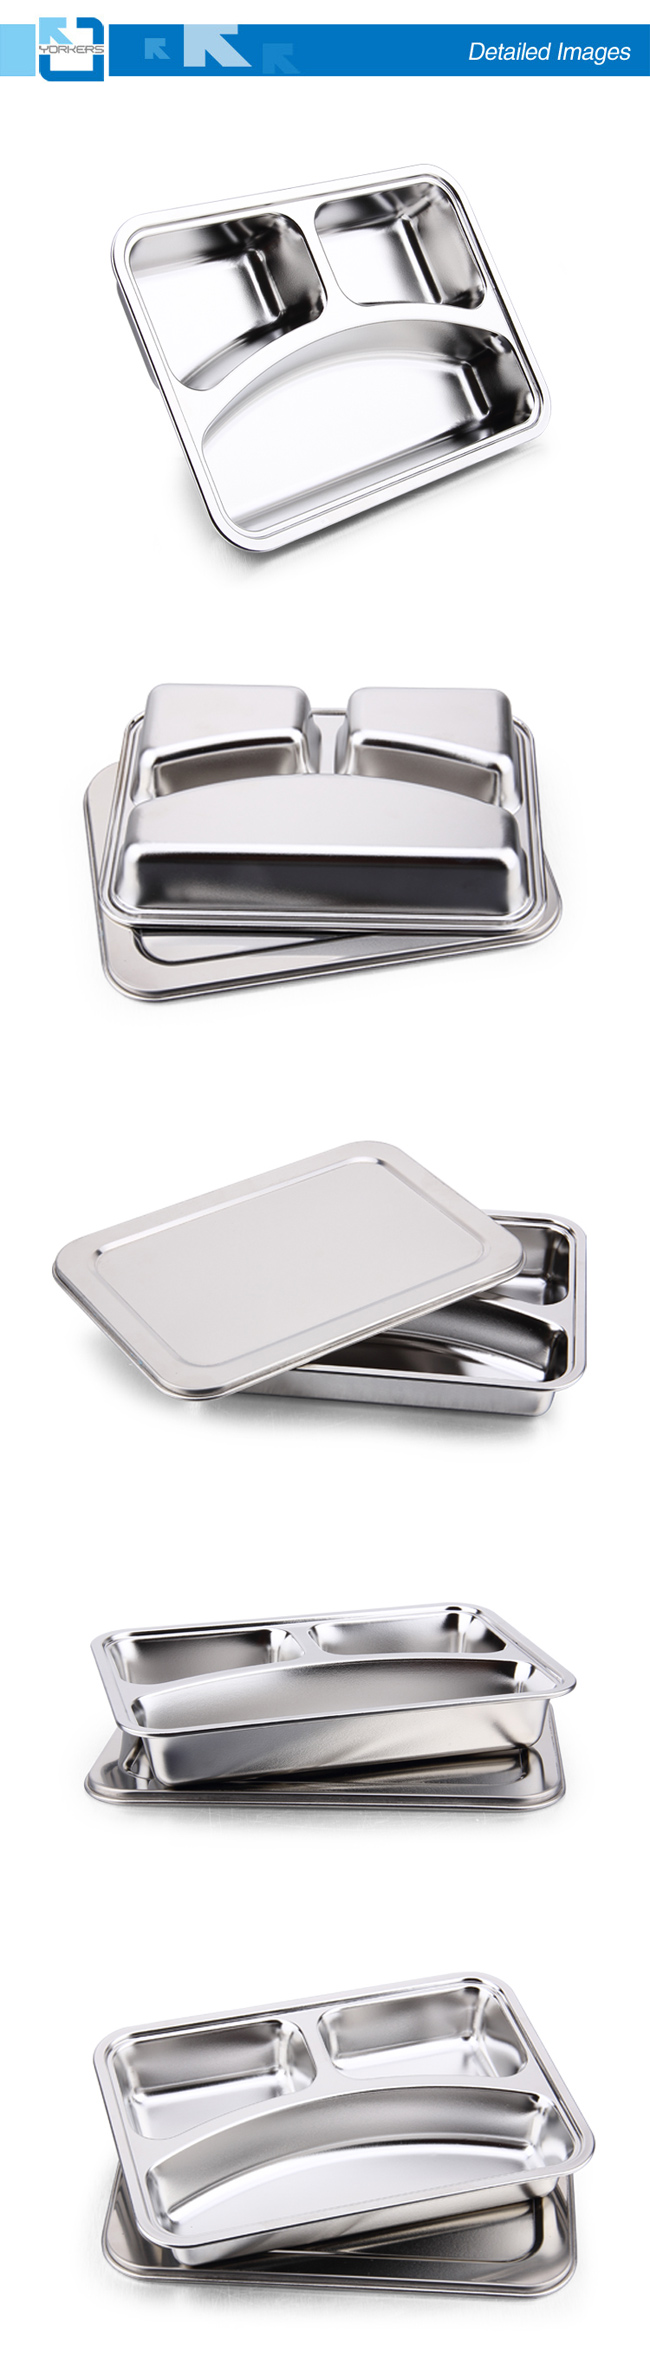 3 Compartments Rectangular Stainless Steel Fast Food Tray Snack Tray